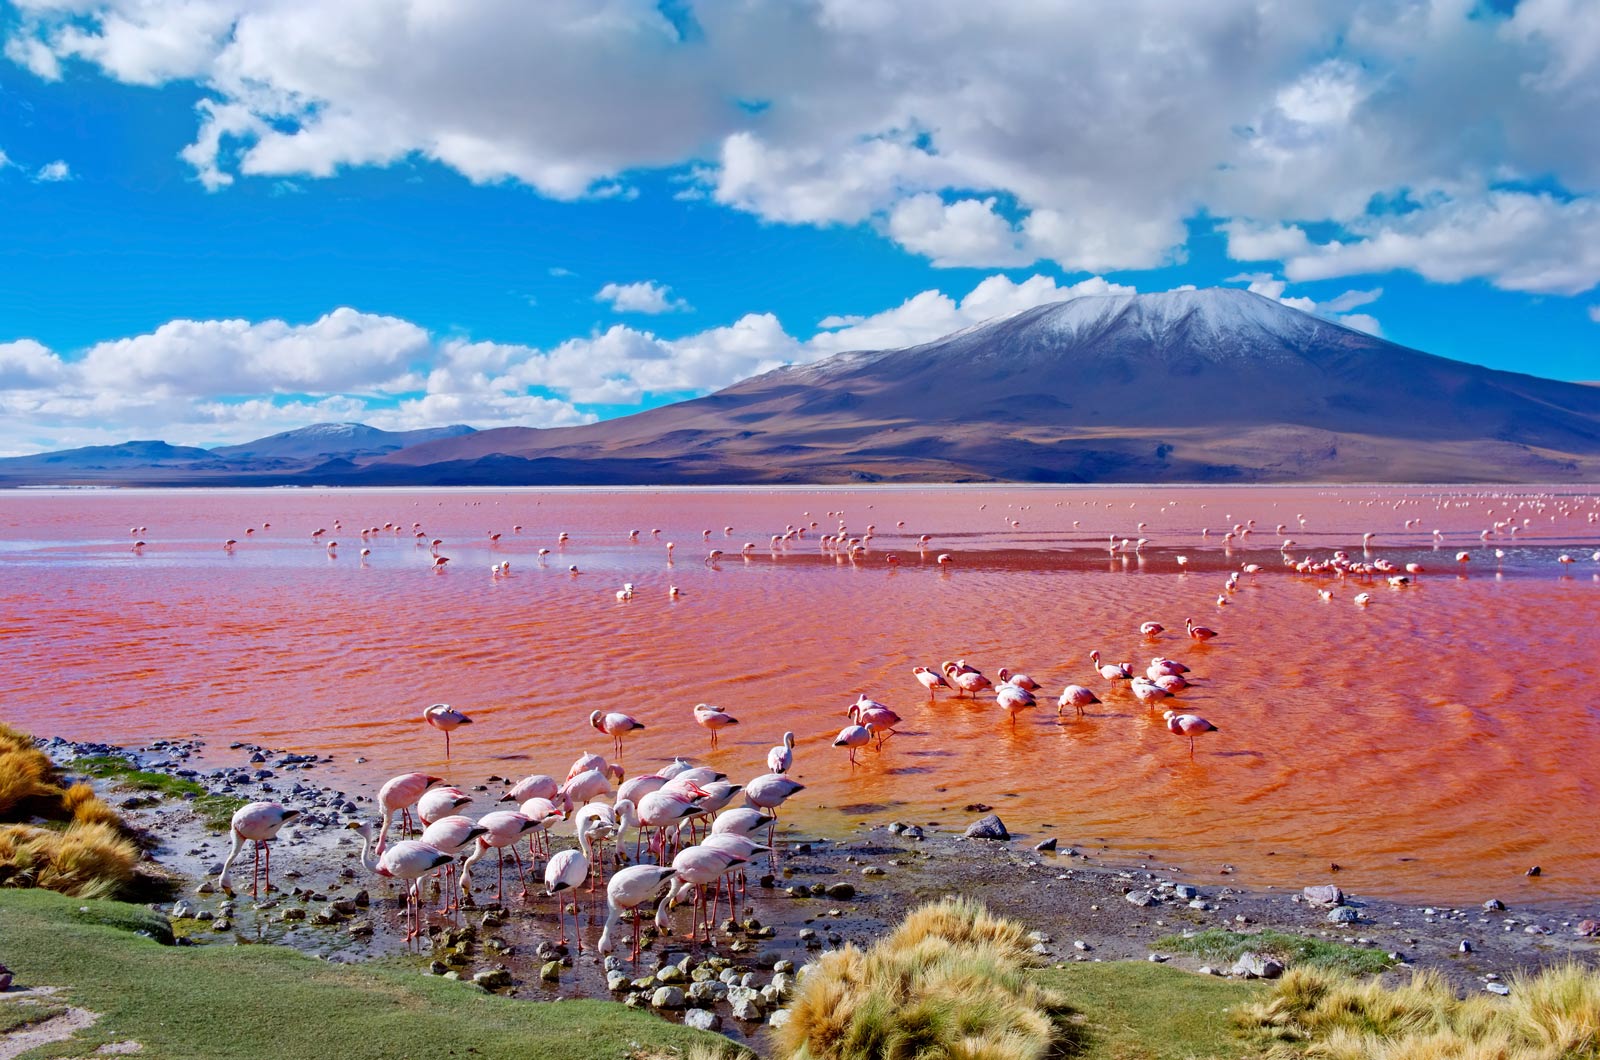 A Bolivia Salt Flats Tour in Uyuni: Everything You Need to Know